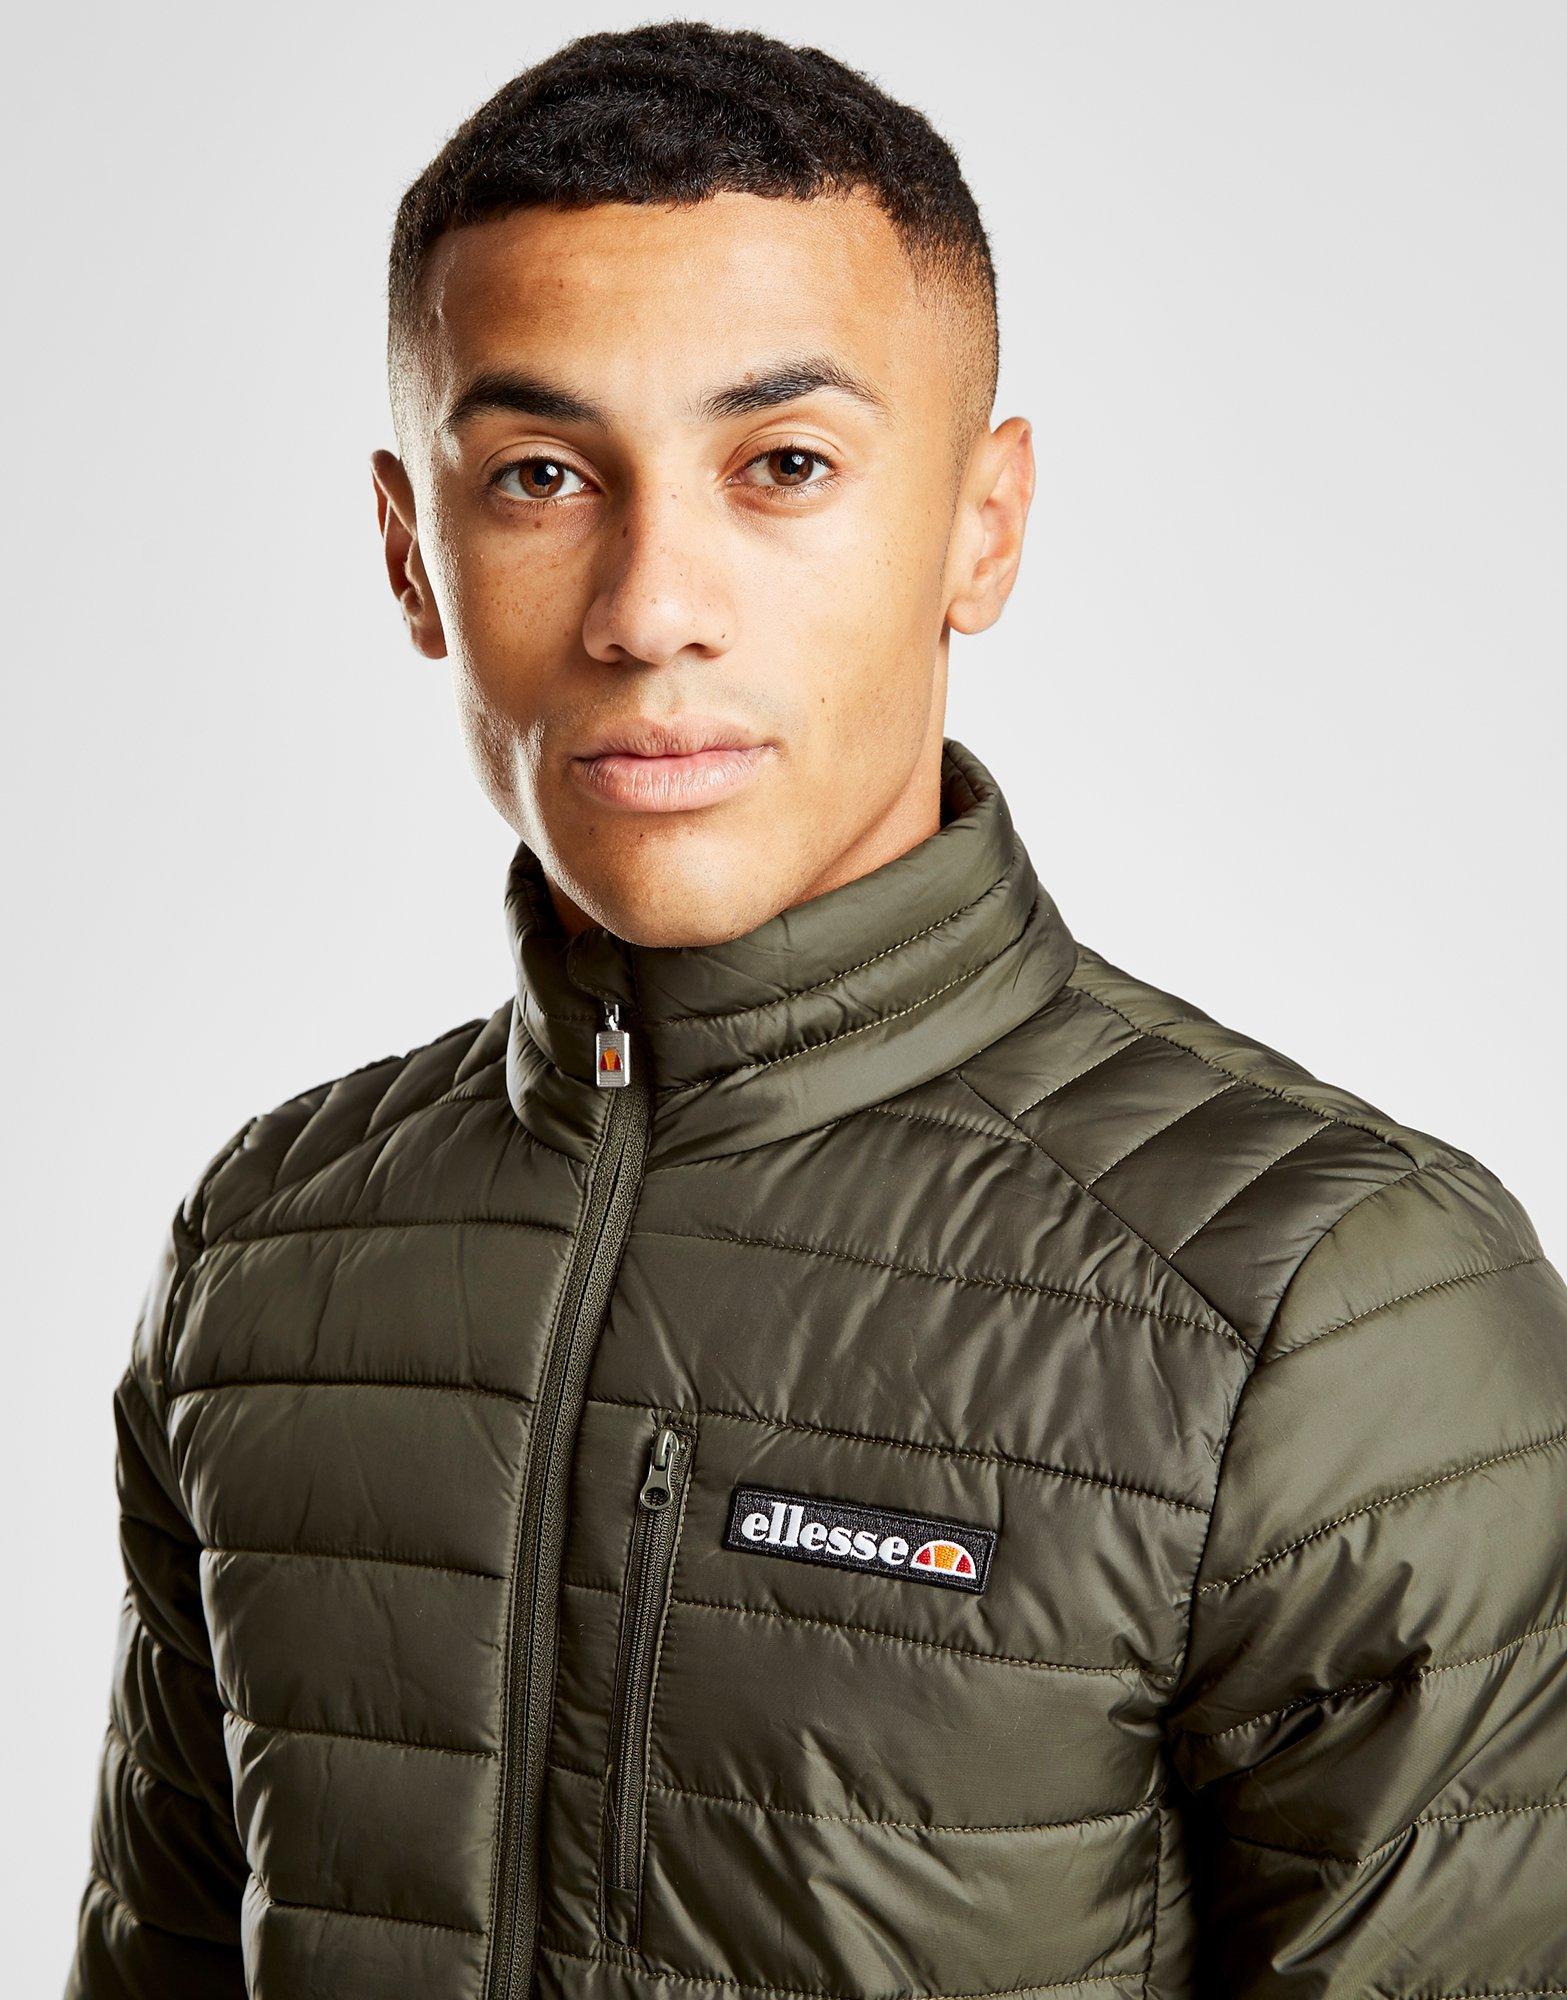 Ellesse Synthetic Frantino Jacket for 